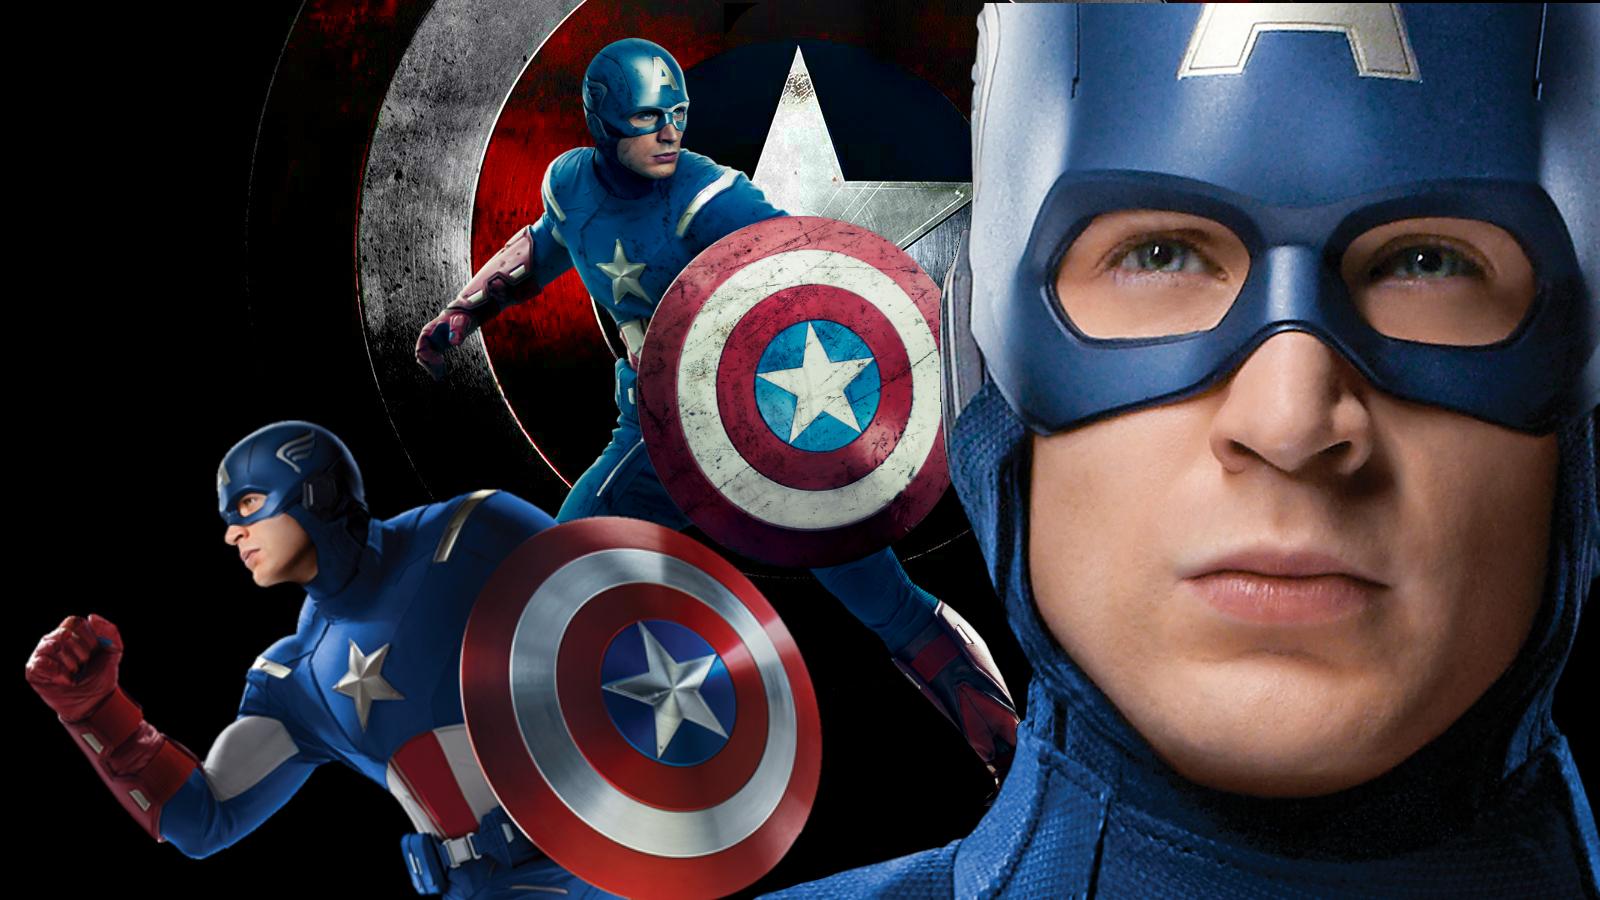 Captain America Hd Wallpaper For Android - Captain America The Avengers 2012 - HD Wallpaper 